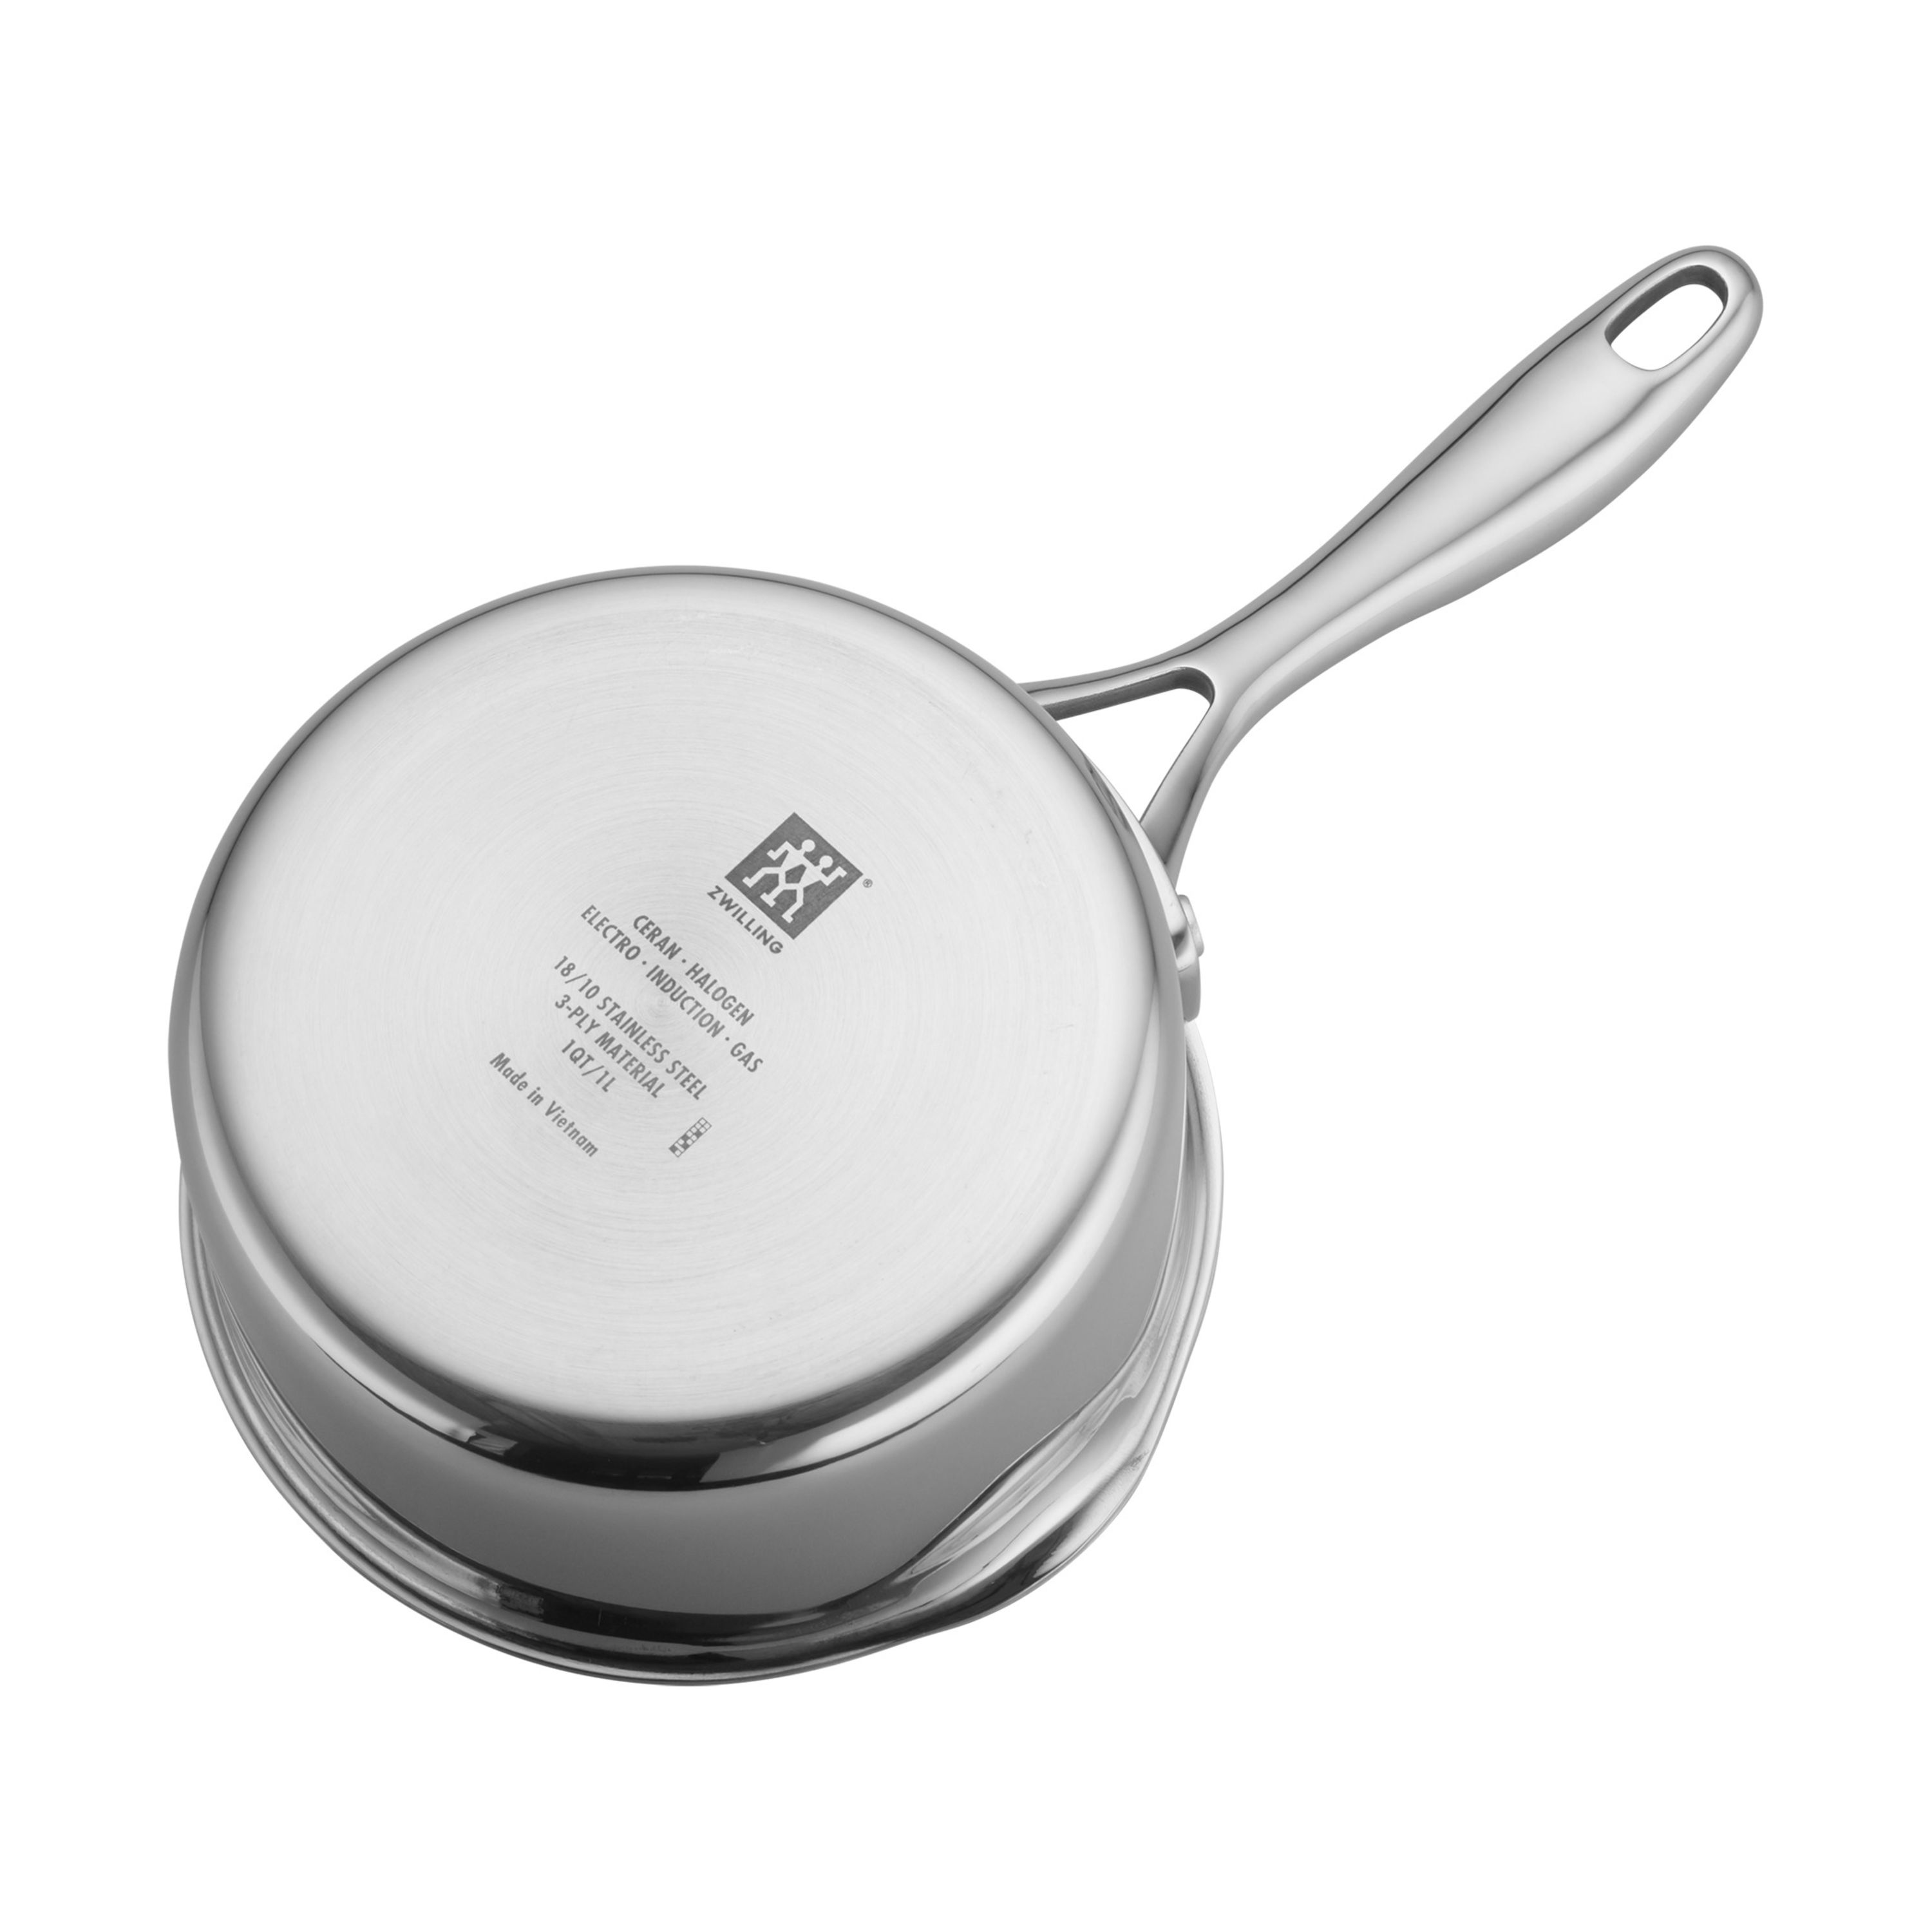 GYST Series Pure Solid Silver Sauce Pan